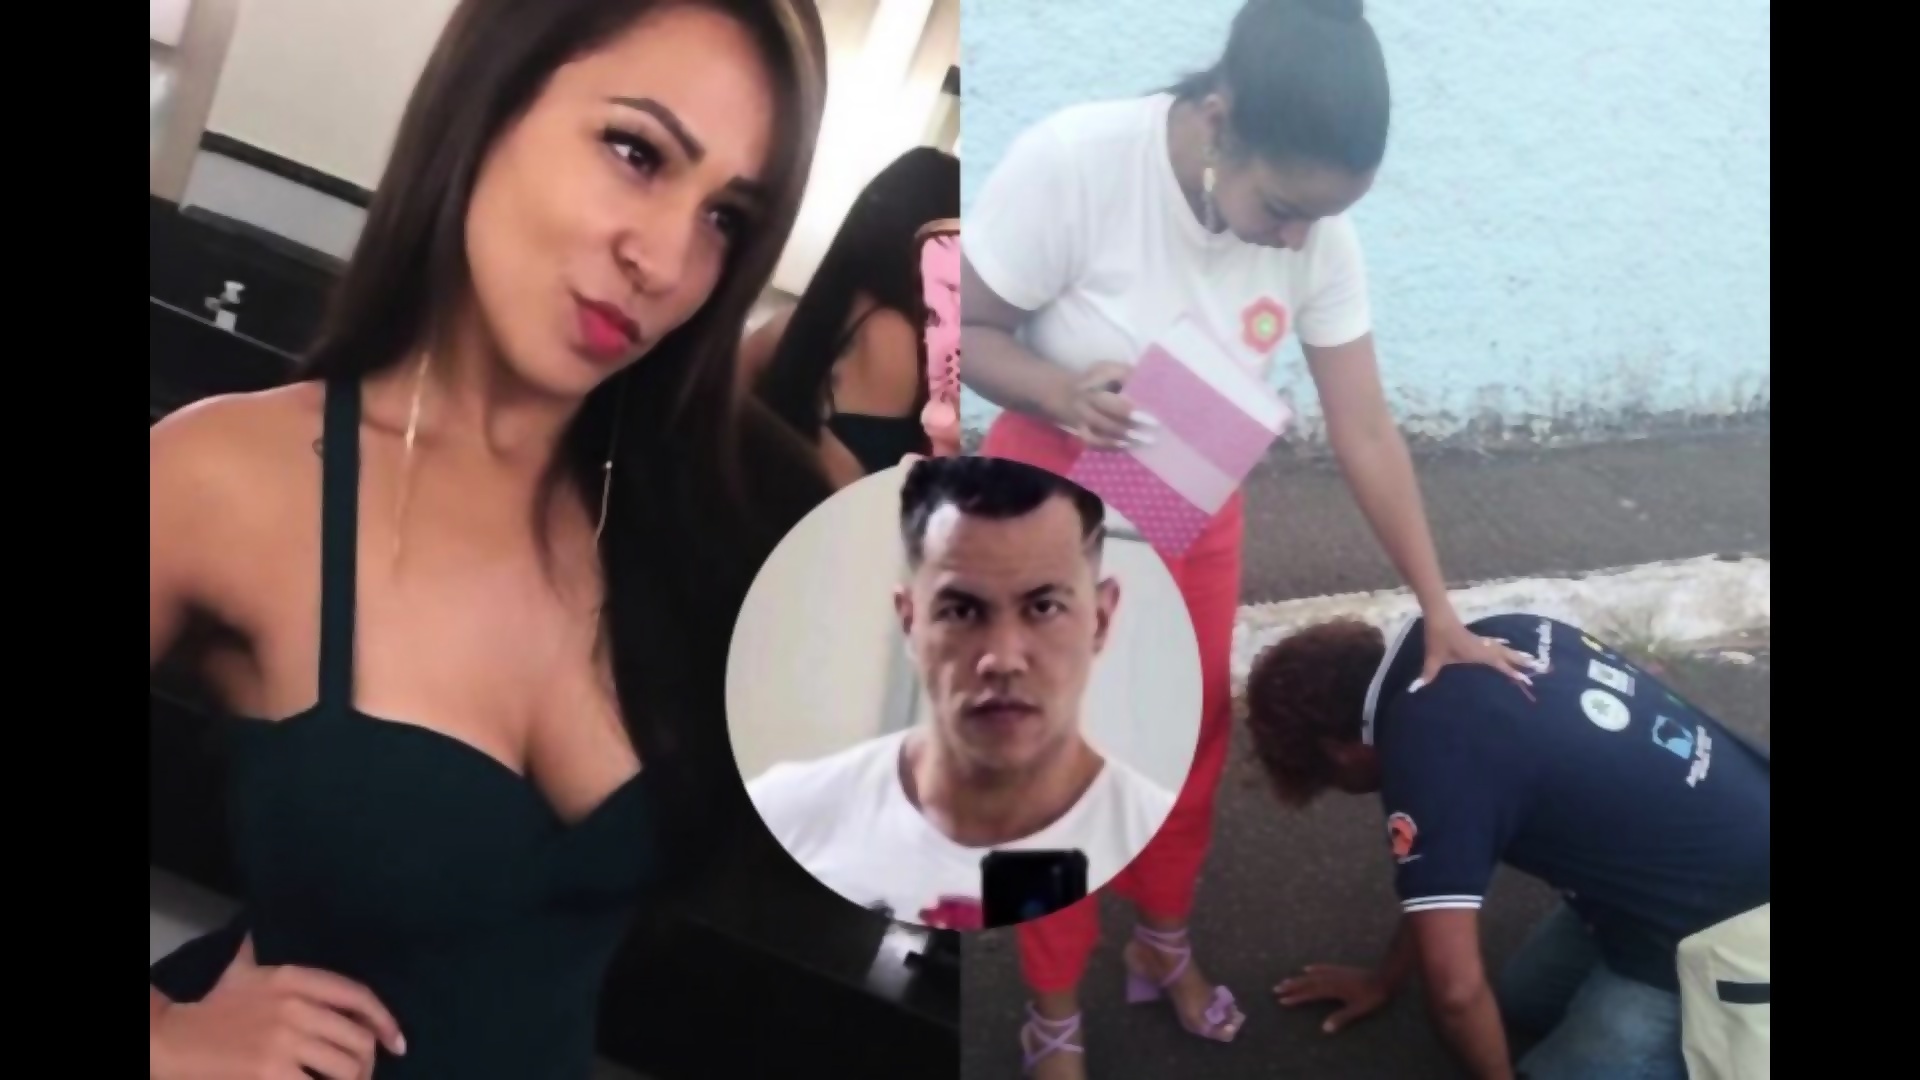 CONTROVERSIAL VIDEO ) Hot Wife Sandrinha Mineirinha Pastor Caught Cheating On Her Personal Husband With A Beggar photo